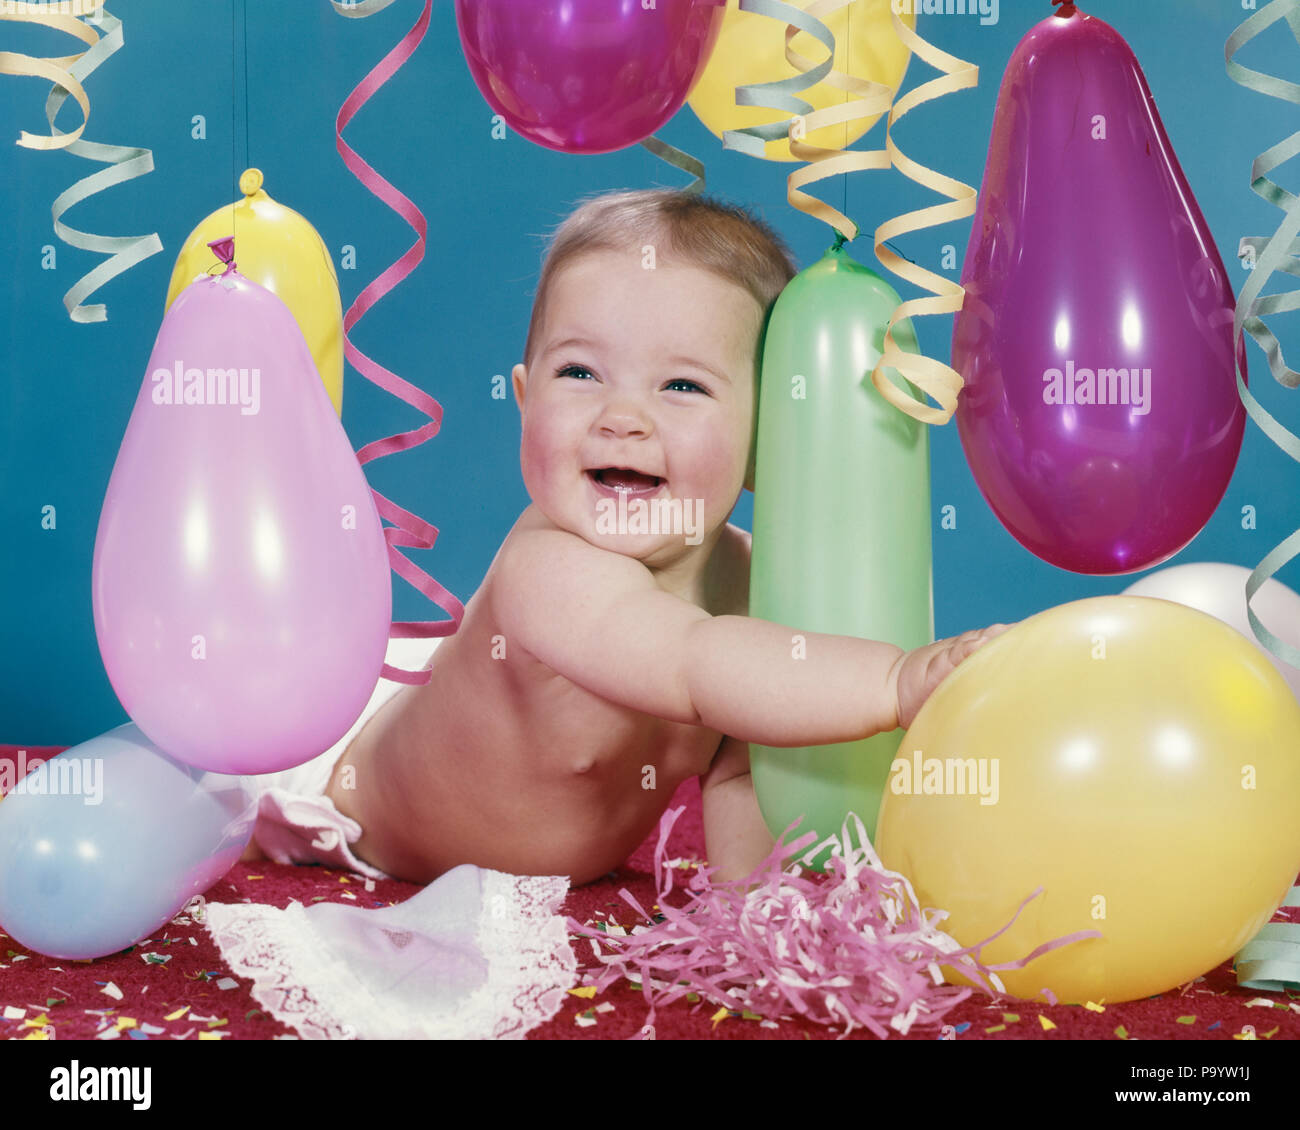 1960s BABY GIRL HUGGING BALLOON CONFETTI STREAMERS SMILING HAPPY  - kn377 HAR001 HARS EXPRESSIONS EYE CONTACT HAPPINESS CHEERFUL EXCITEMENT OCCUPATIONS PARTIES SMILES JOYFUL GROWTH JUVENILES BABY GIRL CAUCASIAN ETHNICITY HAR001 OLD FASHIONED Stock Photo